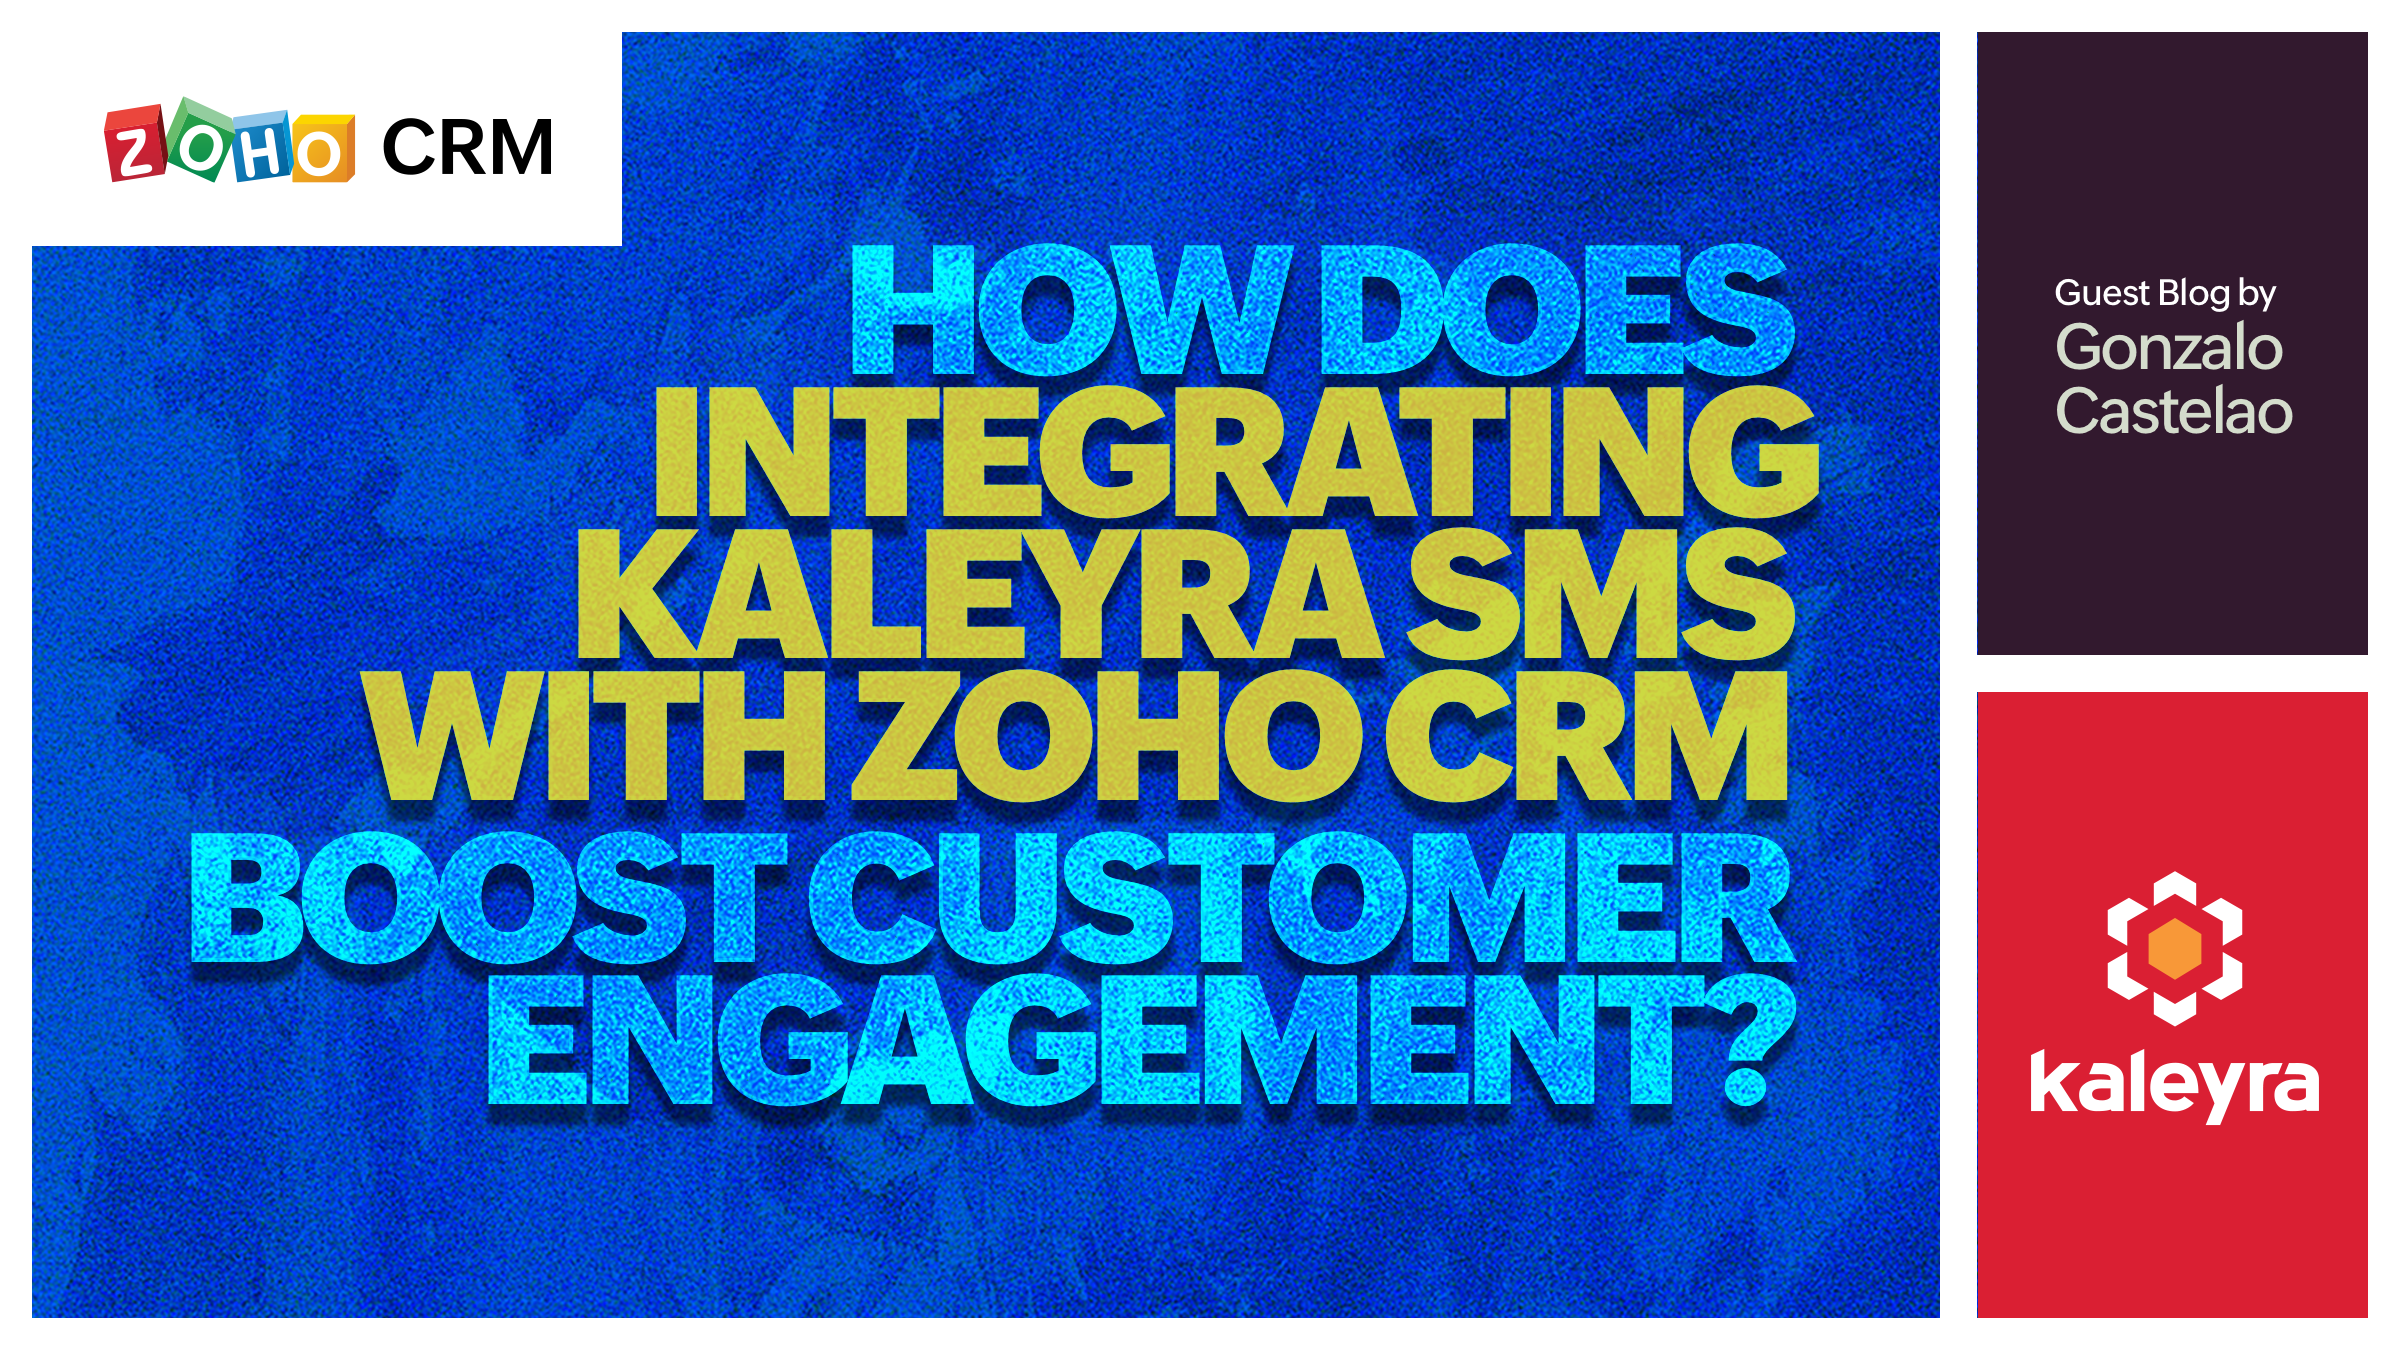 How does integrating Kaleyra SMS with Zoho CRM boost customer engagement?